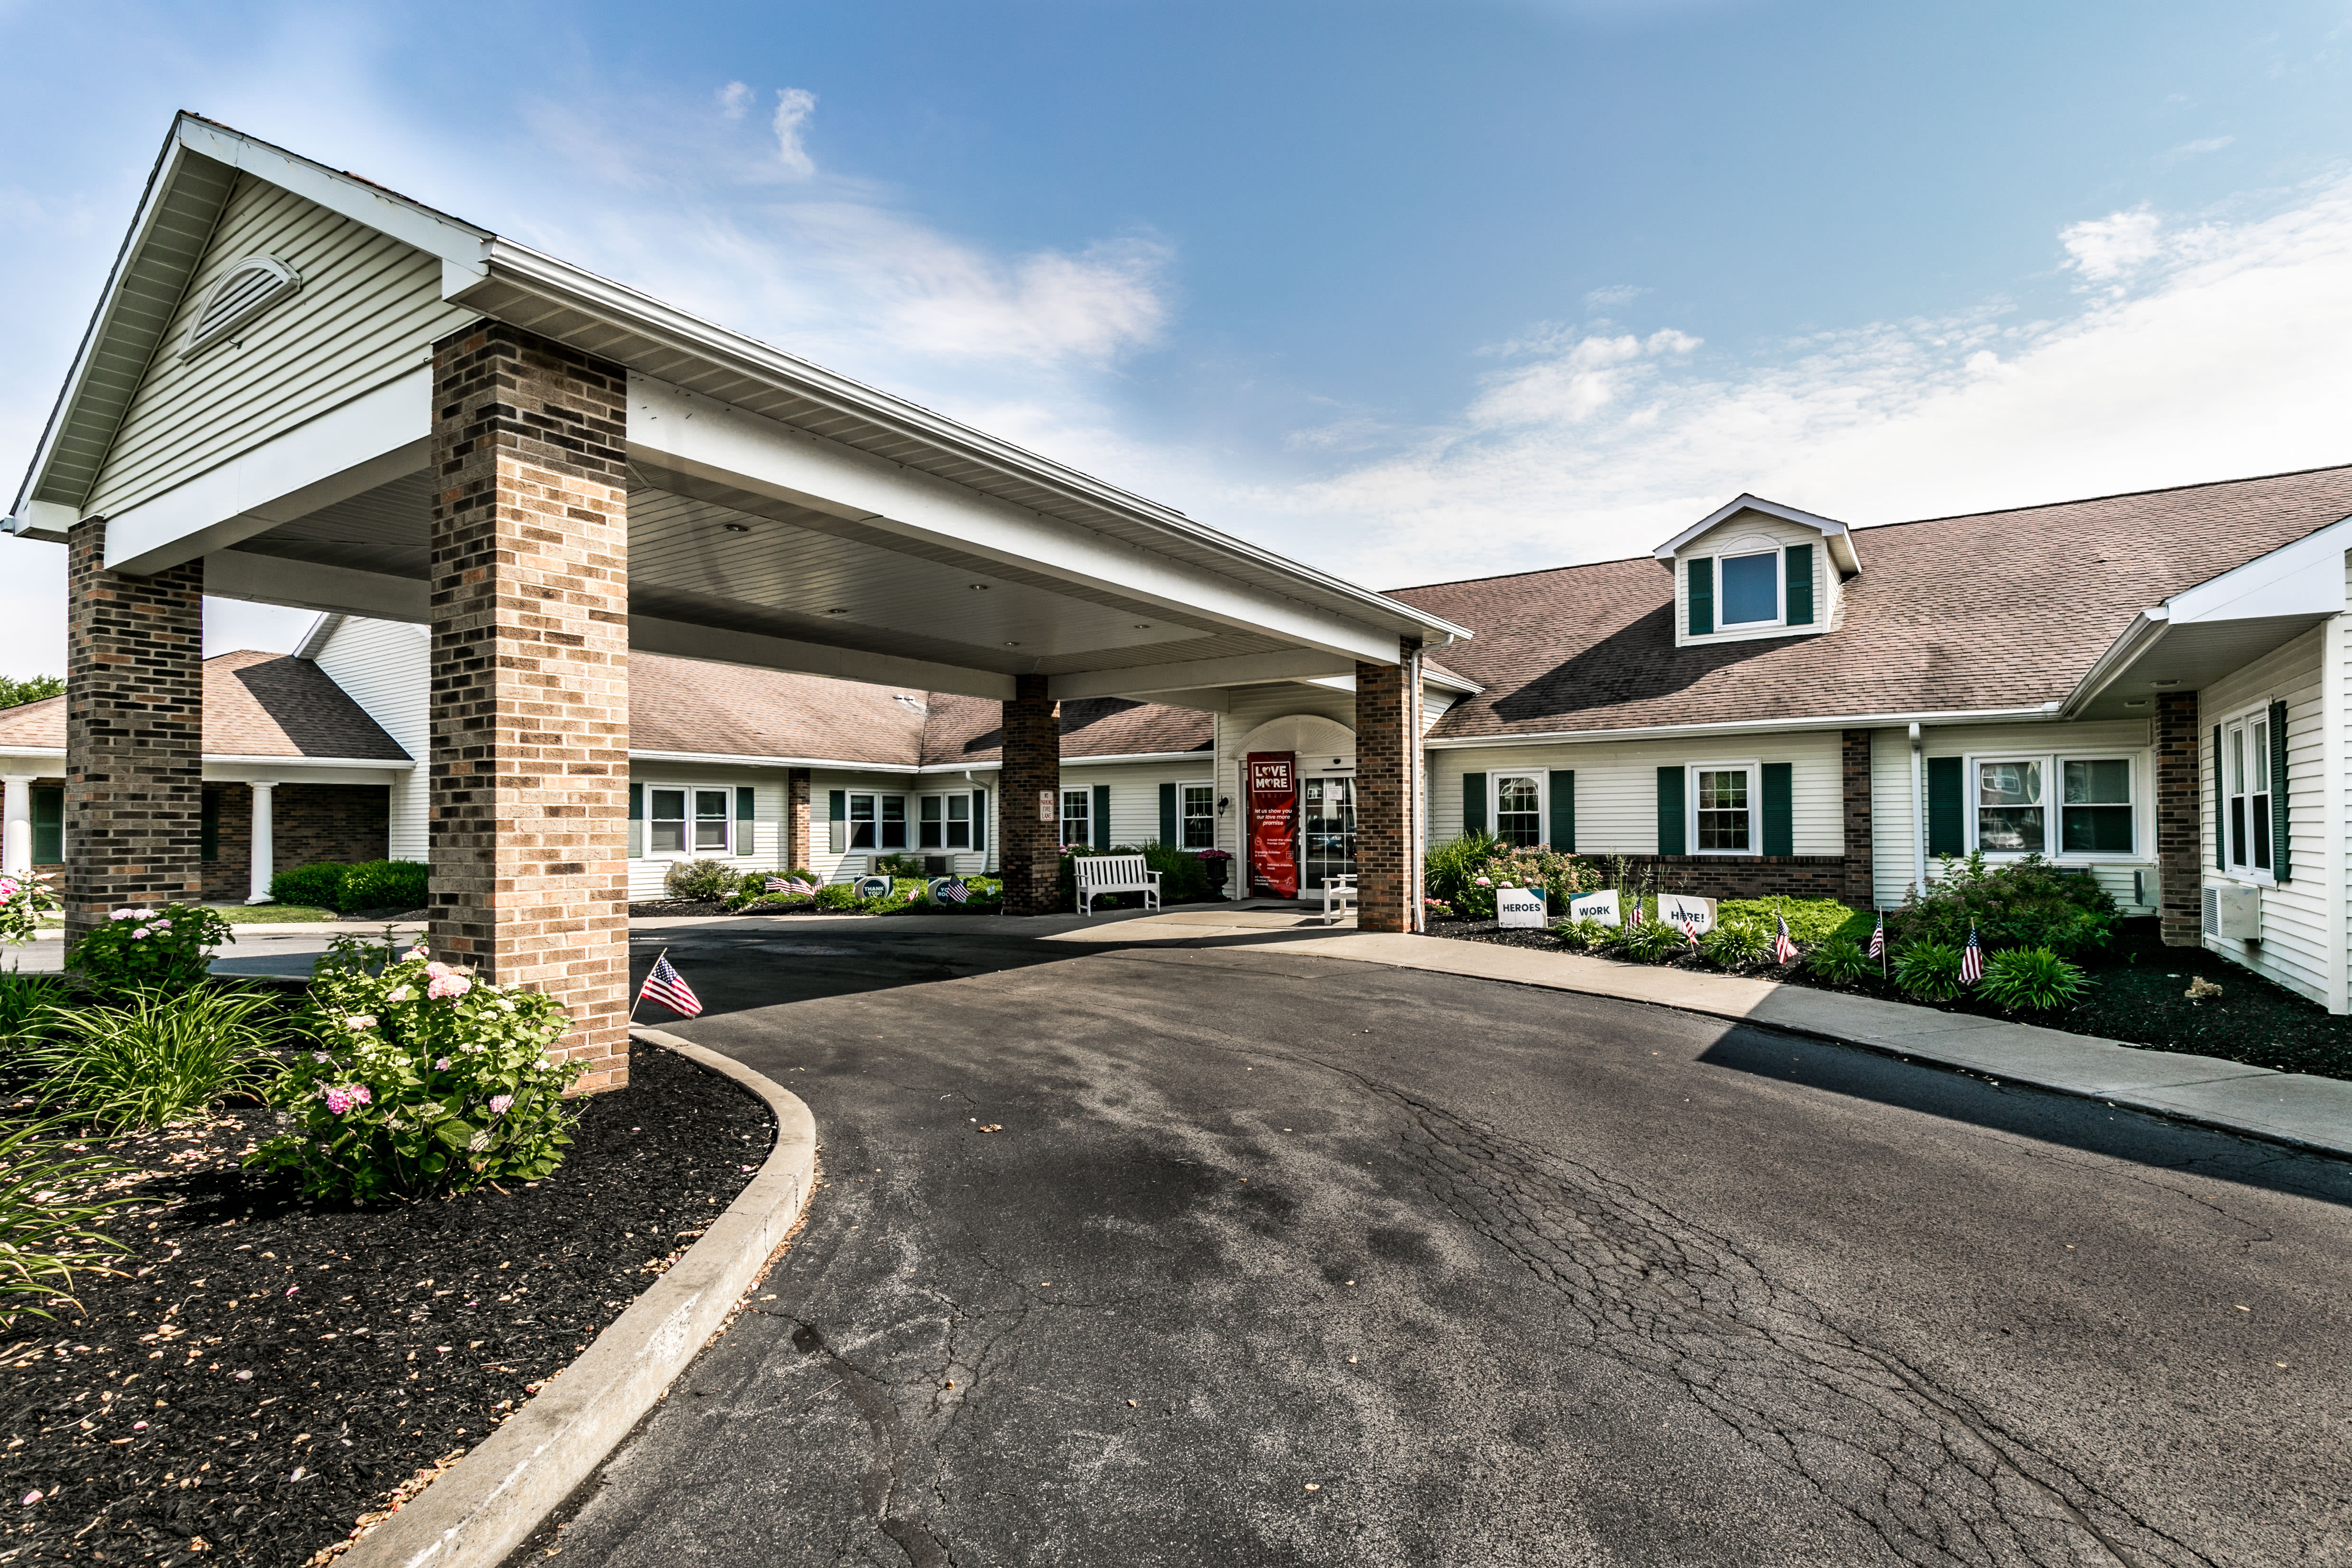 Alzheimer's care at Keepsake Village at Greenpoint in Liverpool, New York